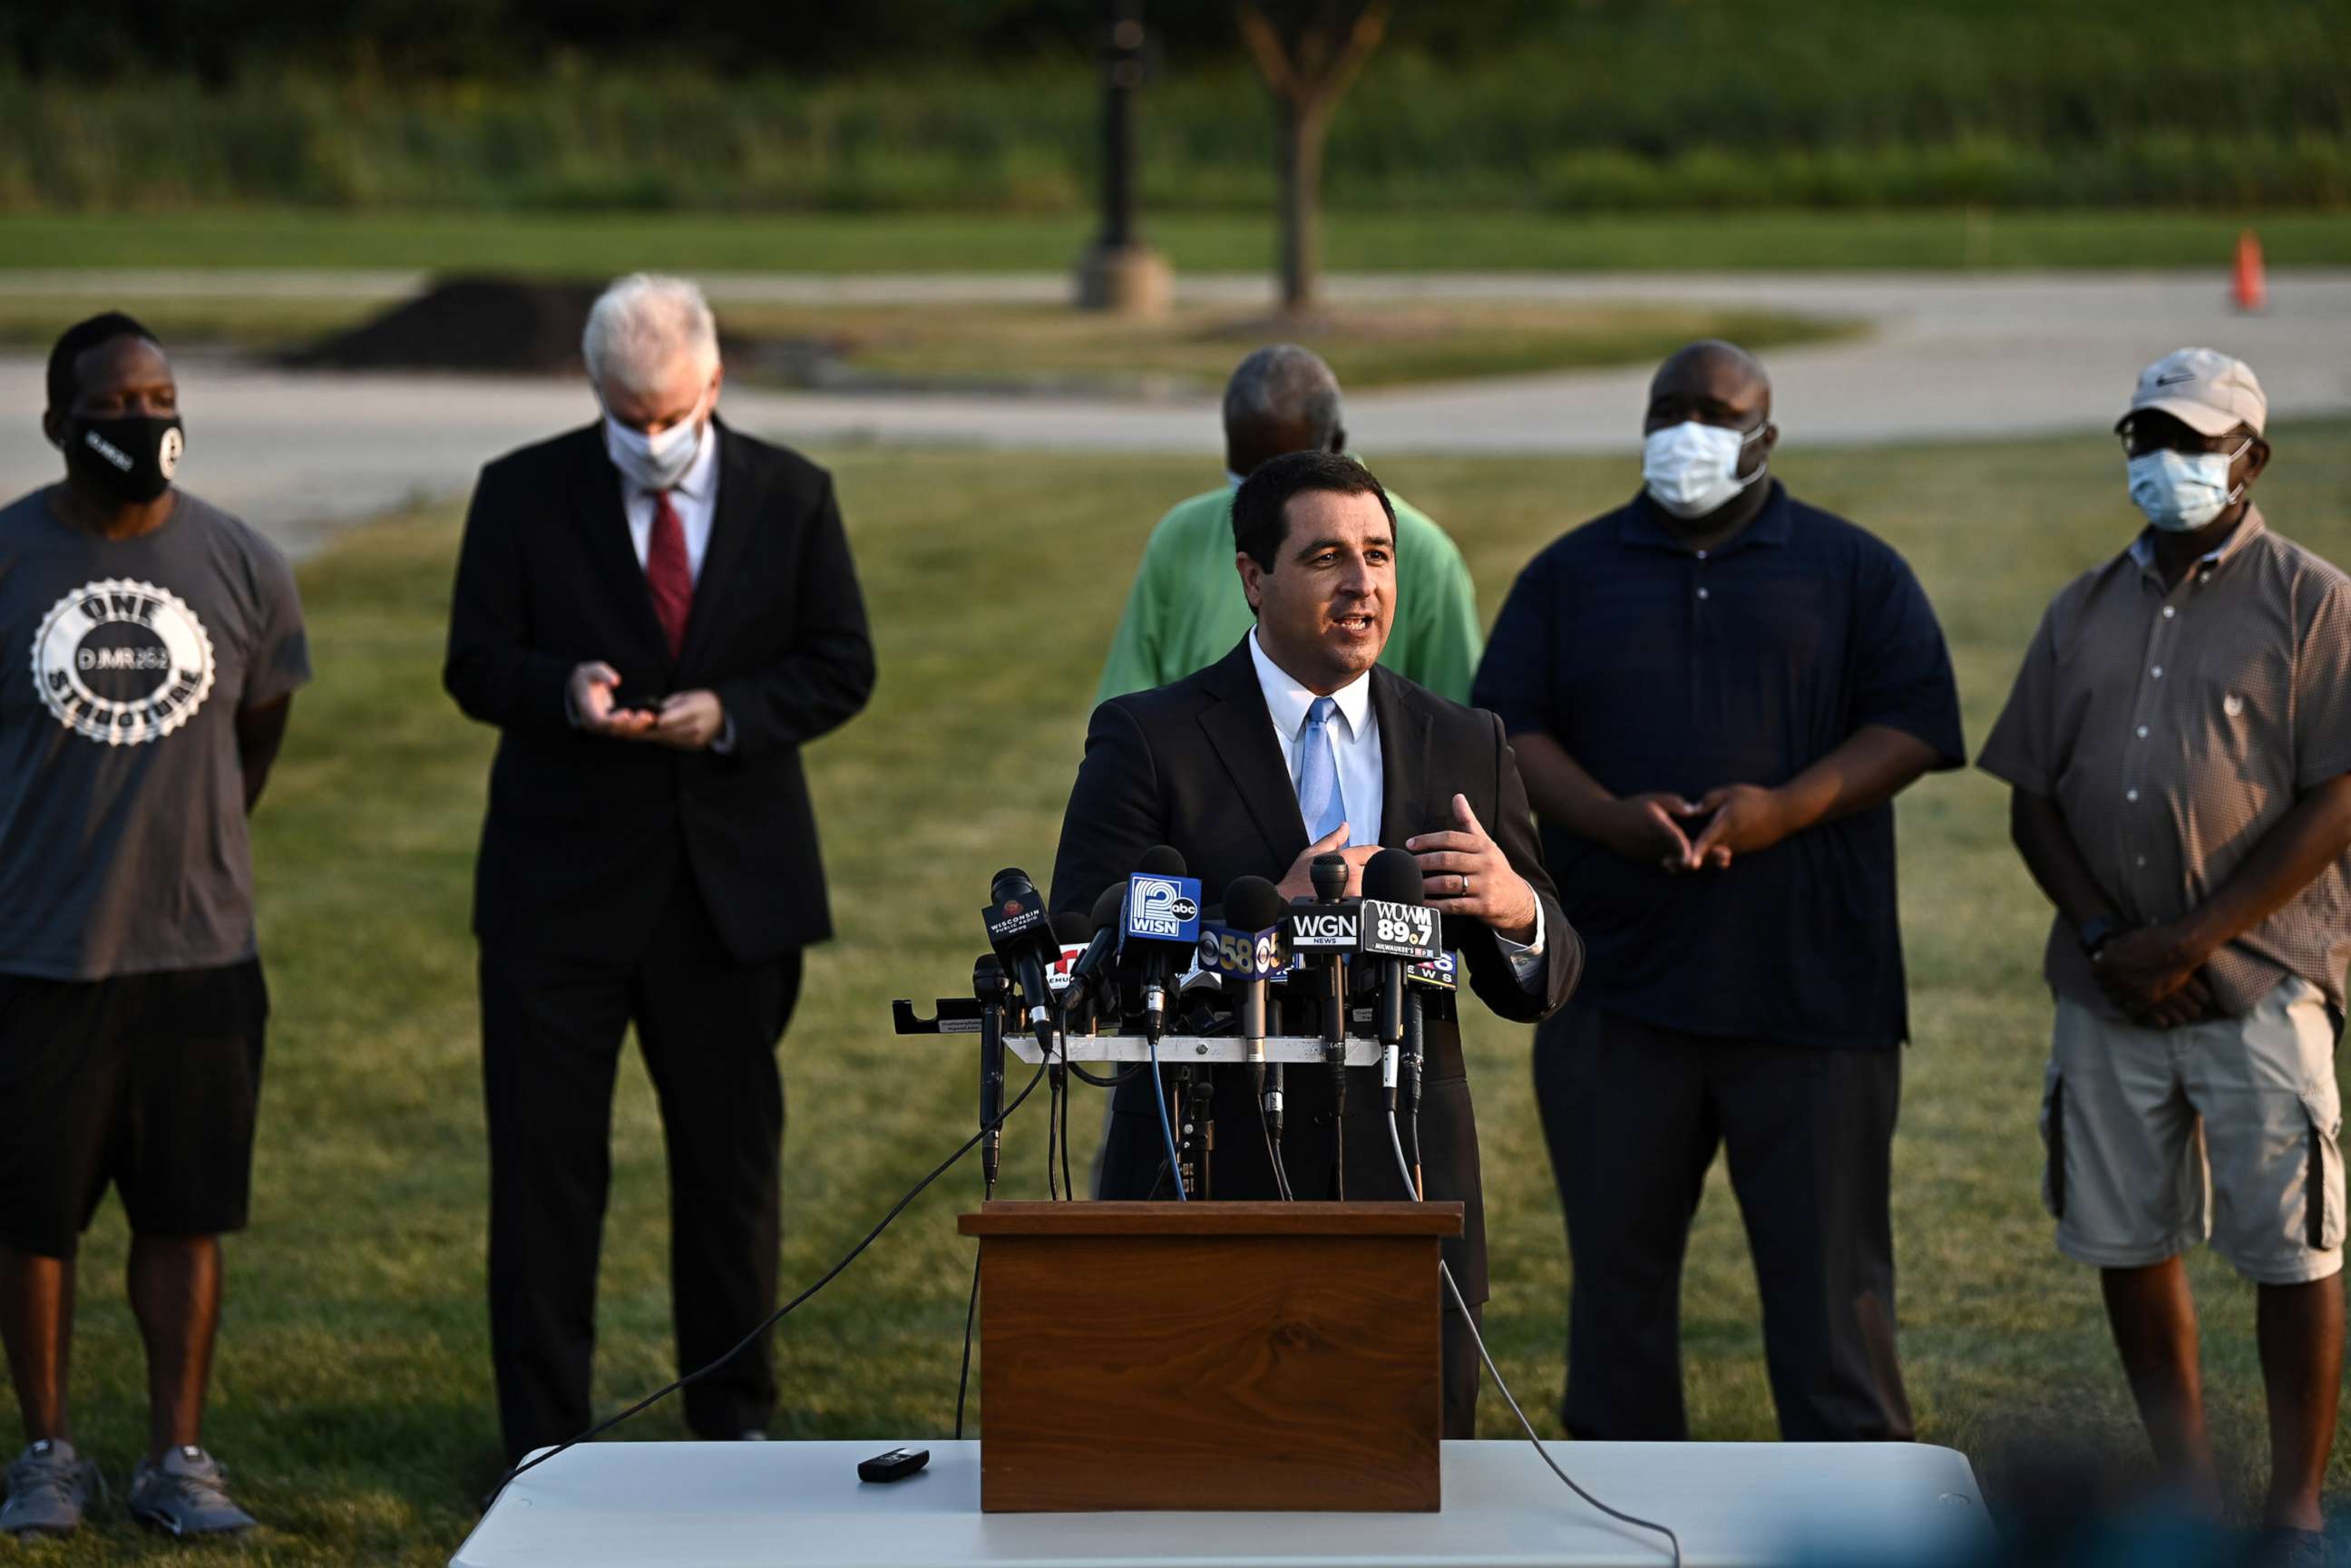 PHOTO: Wisconsin Attorney General Josh Kaul speaks during a news conference following the police shooting of Jacob Blake, a Black man, in Kenosha, Wis., Aug. 26, 2020.